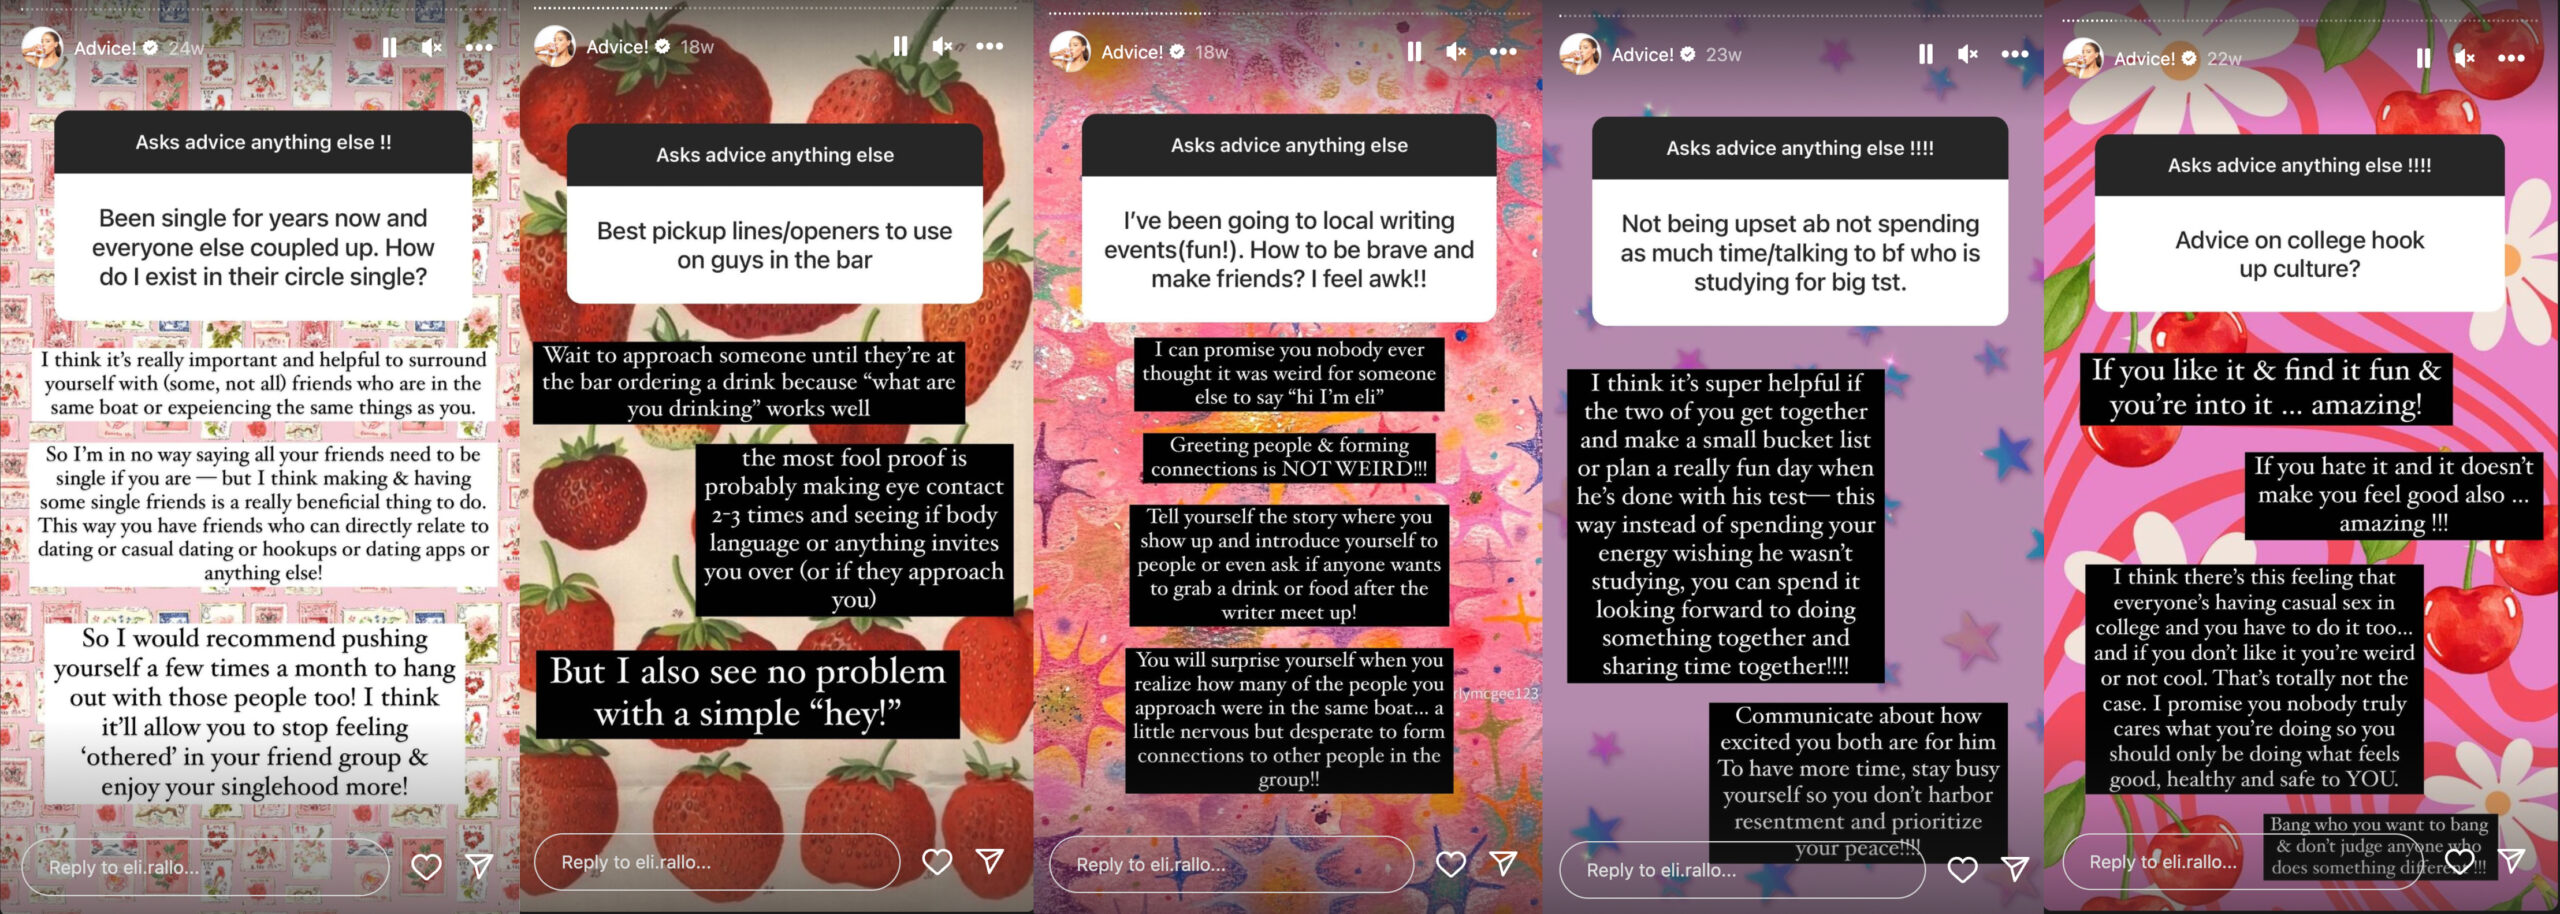 Five screenshots from Eli Rallo's saved "Advice" stories on Instagram.